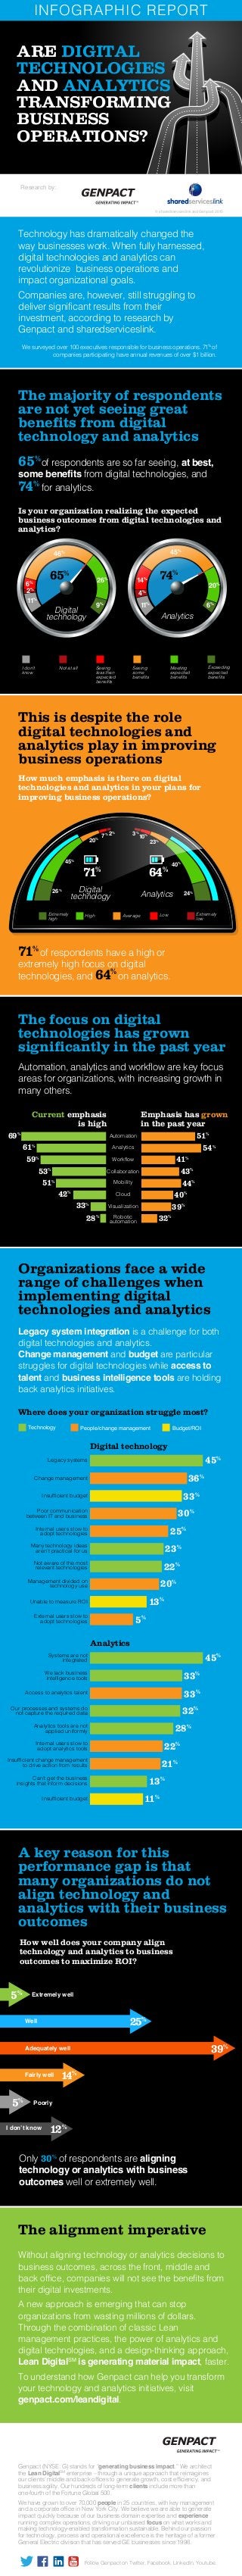 ARE DIGITAL
TECHNOLOGIES
AND ANALYTICS
TRANSFORMING
BUSINESS
OPERATIONS?
INFOGRAPHIC REPORT
The majority of respondents
are not yet seeing great
benefits from digital
technology and analytics
65%
of respondents are so far seeing, at best,
some benefits from digital technologies, and
74%
for analytics.
The focus on digital
technologies has grown
significantly in the past year
Automation, analytics and workflow are key focus
areas for organizations, with increasing growth in
many others.
A key reason for this
performance gap is that
many organizations do not
align technology and
analytics with their business
outcomes
Only 30%
of respondents are aligning
technology or analytics with business
outcomes well or extremely well.
This is despite the role
digital technologies and
analytics play in improving
business operations
Organizations face a wide
range of challenges when
implementing digital
technologies and analytics
Is your organization realizing the expected
business outcomes from digital technologies and
analytics?
How much emphasis is there on digital
technologies and analytics in your plans for
improving business operations?
Where does your organization struggle most?
How well does your company align
technology and analytics to business
outcomes to maximize ROI?
Current emphasis
is high
Digital technology
Analytics
Emphasis has grown
in the past year
69%
61%
59%
53%
51%
42%
33%
28%
51%
54%
41%
43%
44%
40%
39%
32%
45%
36%
33%
30%
25%
23%
22%
20%
13%
5%
Legacy system integration is a challenge for both
digital technologies and analytics.
Change management and budget are particular
struggles for digital technologies while access to
talent and business intelligence tools are holding
back analytics initiatives.
The alignment imperative
Without aligning technology or analytics decisions to
business outcomes, across the front, middle and
back office, companies will not see the benefits from
their digital investments.
A new approach is emerging that can stop
organizations from wasting millions of dollars.
Through the combination of classic Lean
management practices, the power of analytics and
digital technologies, and a design-thinking approach,
Lean DigitalSM
is generating material impact, faster.
To understand how Genpact can help you transform
your technology and analytics initiatives, visit
genpact.com/leandigital.
Genpact (NYSE: G) stands for “generating business impact.” We architect
the Lean DigitalSM
enterprise – through a unique approach that reimagines
our clients’ middle and back offices to generate growth, cost efficiency, and
business agility. Our hundreds of long-term clients include more than
one-fourth of the Fortune Global 500.
We have grown to over 70,000 people in 25 countries, with key management
and a corporate office in New York City. We believe we are able to generate
impact quickly because of our business domain expertise and experience
running complex operations, driving our unbiased focus on what works and
making technology-enabled transformation sustainable. Behind our passion
for technology, process and operational excellence is the heritage of a former
General Electric division that has served GE businesses since 1998.
Follow Genpact on Twitter, Facebook, LinkedIn, Youtube.
Automation
Analytics
Workflow
Collaboration
Mobility
Cloud
Visualization
Robotic
automation
Legacy systems
People/change managementTechnology Budget/ROI
Change management
Insufficient budget
Poor communication
between IT and business
Internal users slow to
adopt technologies
Many technology ideas
aren’t practical for us
Not aware of the most
relevant technologies
Management divided on
technology use
External users slow to
adopt technologies
Unable to measure ROI
45%
33%
33%
32%
28%
22%
21%
13%
11%
Systems are not
integrated
We lack business
intelligence tools
Access to analytics talent
Our processes and systems do
not capture the required data
Analytics tools are not
applied uniformly
Internal users slow to
adopt analytics tools
Insufficient change management
to drive action from results
Can’t get the business
insights that inform decisions
Insufficient budget
Research by:
© sharedserviceslink and Genpact 2015
Technology has dramatically changed the
way businesses work. When fully harnessed,
digital technologies and analytics can
revolutionize business operations and
impact organizational goals.
Companies are, however, still struggling to
deliver significant results from their
investment, according to research by
Genpact and sharedserviceslink.
We surveyed over 100 executives responsible for business operations. 71%
of
companies participating have annual revenues of over $1 billion.
26%
9%
Digital
technology
Exceeding
expected
benefits
Seeing
less than
expected
benefits
Not at allI don’t
know
Meeting
expected
benefits
Seeing
some
benefits
46%
11%
6%
2%
65%
20%
6%
45%
11%
14%
4%
74%
71%
of respondents have a high or
extremely high focus on digital
technologies, and 64%
on analytics.
Analytics
5%
5%
25%
14%
Extremely well
Well
Fairly well
12%I don’t know
39%Adequately well
Poorly
Digital
technology Analytics
71%
64%
26%
24%
45%
40%
20%
23%
7%
10%2%
3%
Extremely
high
Low Extremely
low
High Average
 